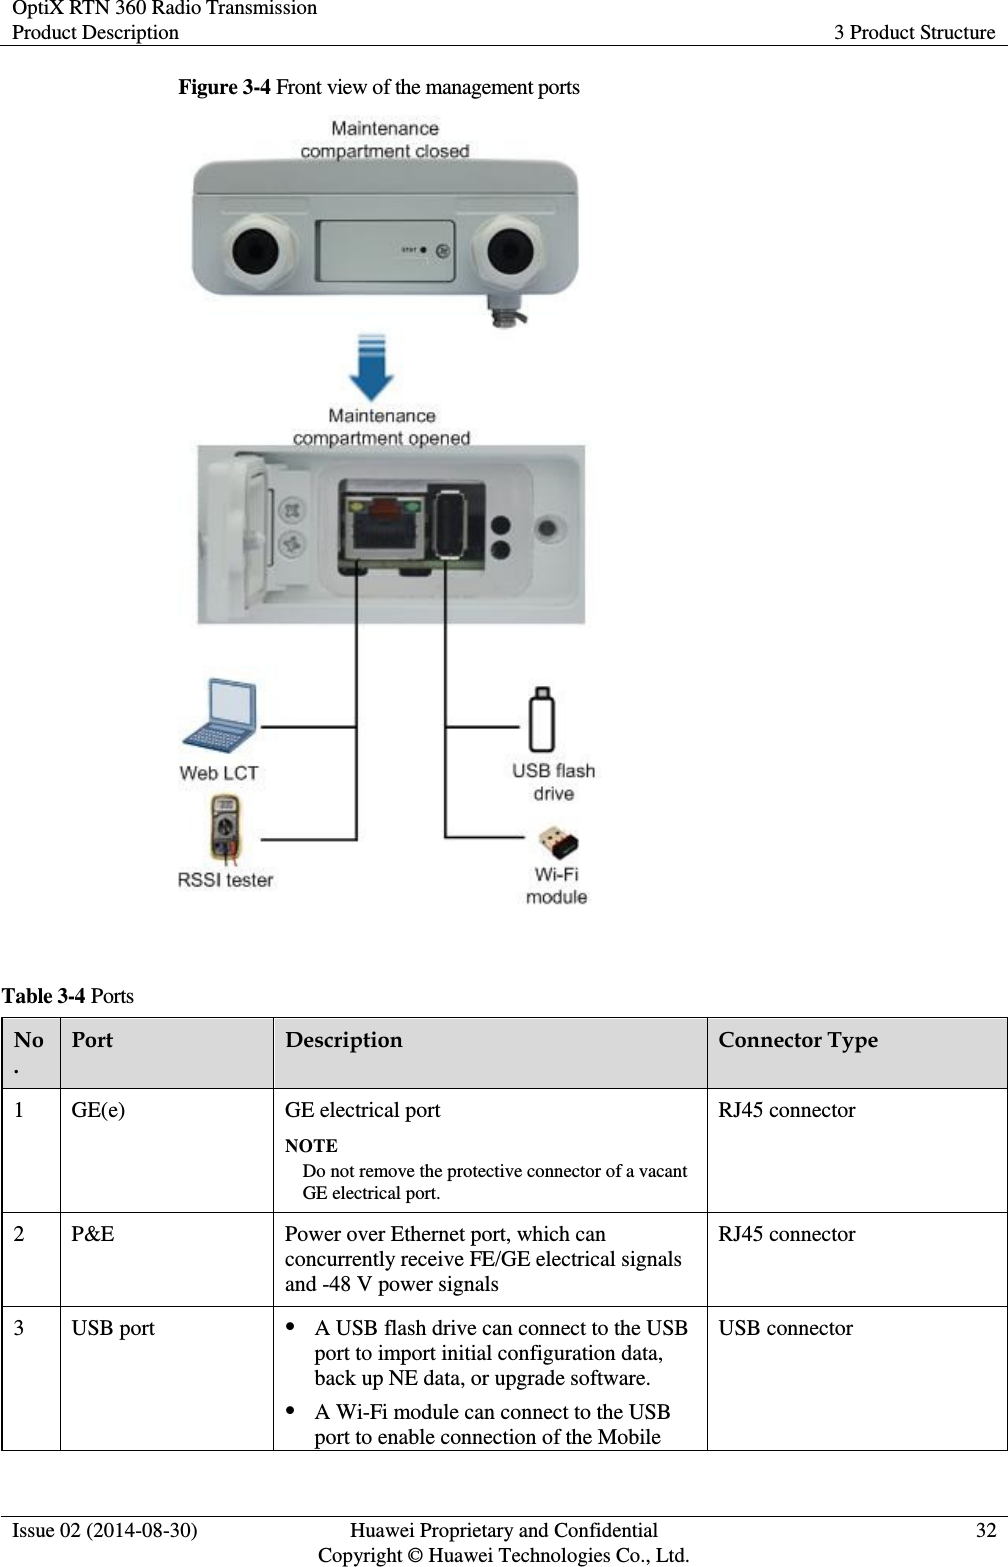 OptiX RTN 360 Radio Transmission Product Description 3 Product Structure  Issue 02 (2014-08-30) Huawei Proprietary and Confidential                                     Copyright © Huawei Technologies Co., Ltd. 32  Figure 3-4 Front view of the management ports   Table 3-4 Ports No. Port Description Connector Type 1 GE(e) GE electrical port NOTE Do not remove the protective connector of a vacant GE electrical port. RJ45 connector 2 P&amp;E Power over Ethernet port, which can concurrently receive FE/GE electrical signals and -48 V power signals RJ45 connector 3 USB port  A USB flash drive can connect to the USB port to import initial configuration data, back up NE data, or upgrade software.    A Wi-Fi module can connect to the USB port to enable connection of the Mobile USB connector 